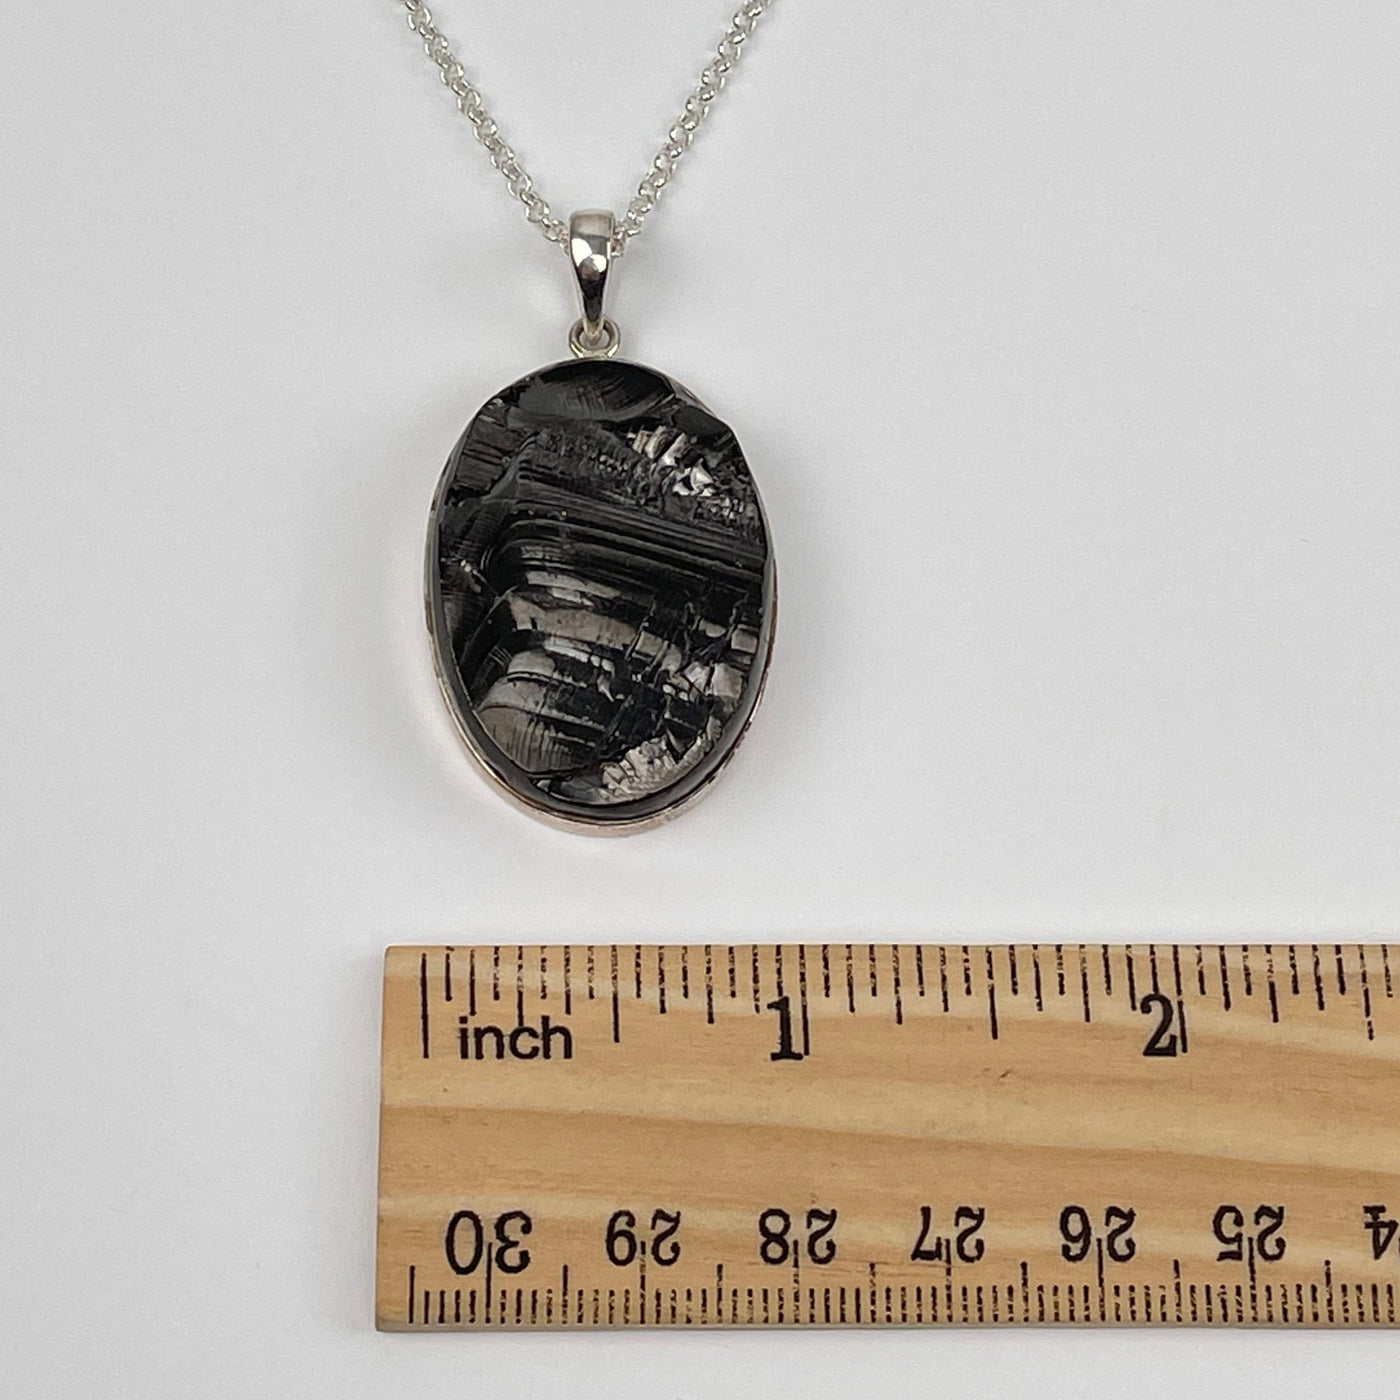 shungite pendant next to a ruler for size reference 